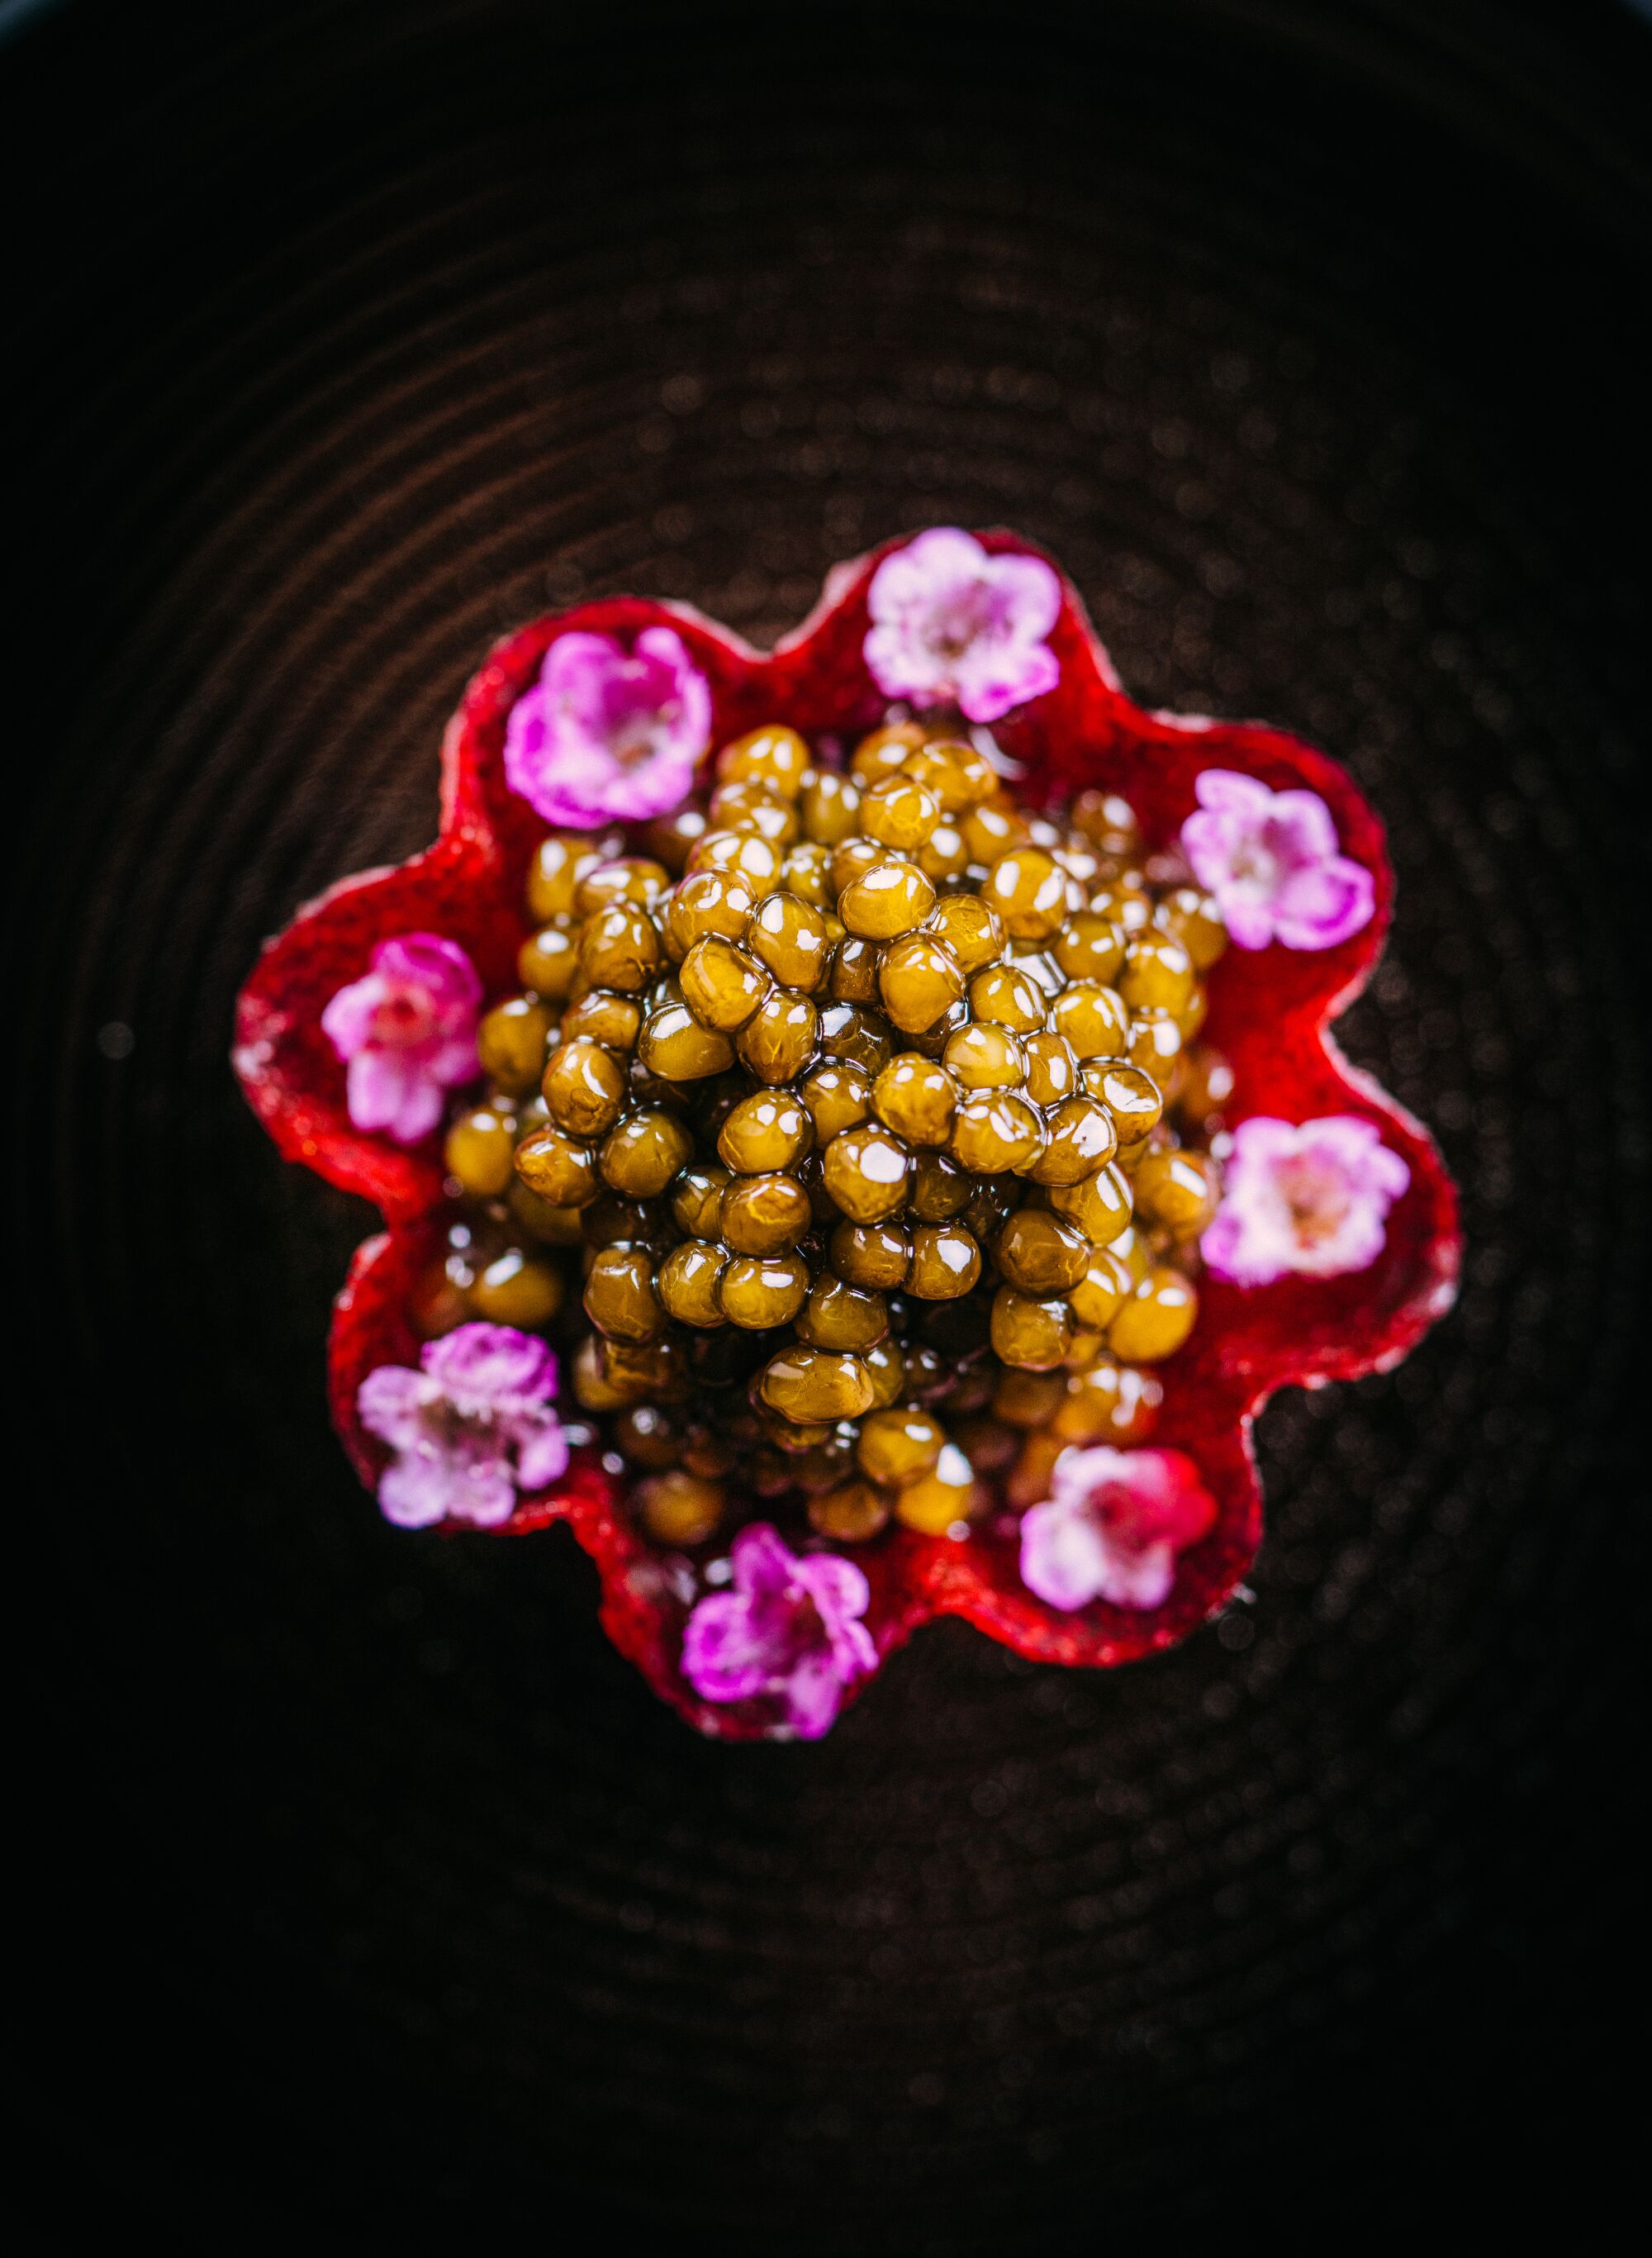 Eric Wolfinger's finished shot of a caviar and beet tart at Addison restaurant in San Diego.